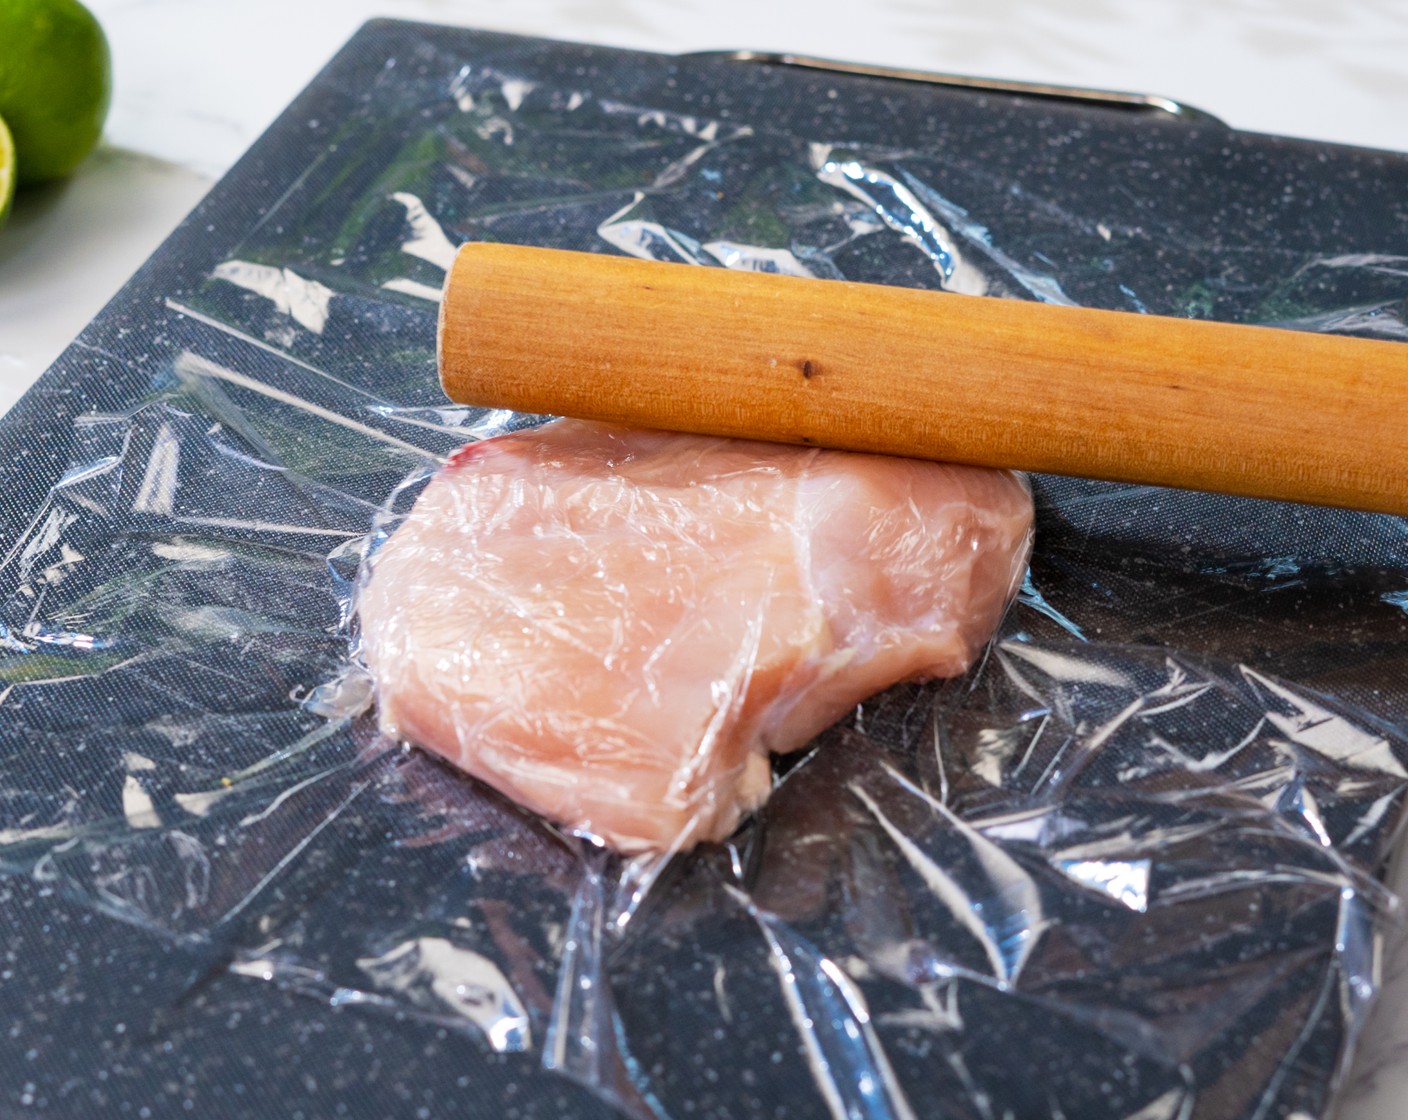 step 2 Place the Boneless, Skinless Chicken Breasts (2) on the cutting board. Cover with cling wrap. Use a rolling pin to pound the chicken breast until it is evenly thick.